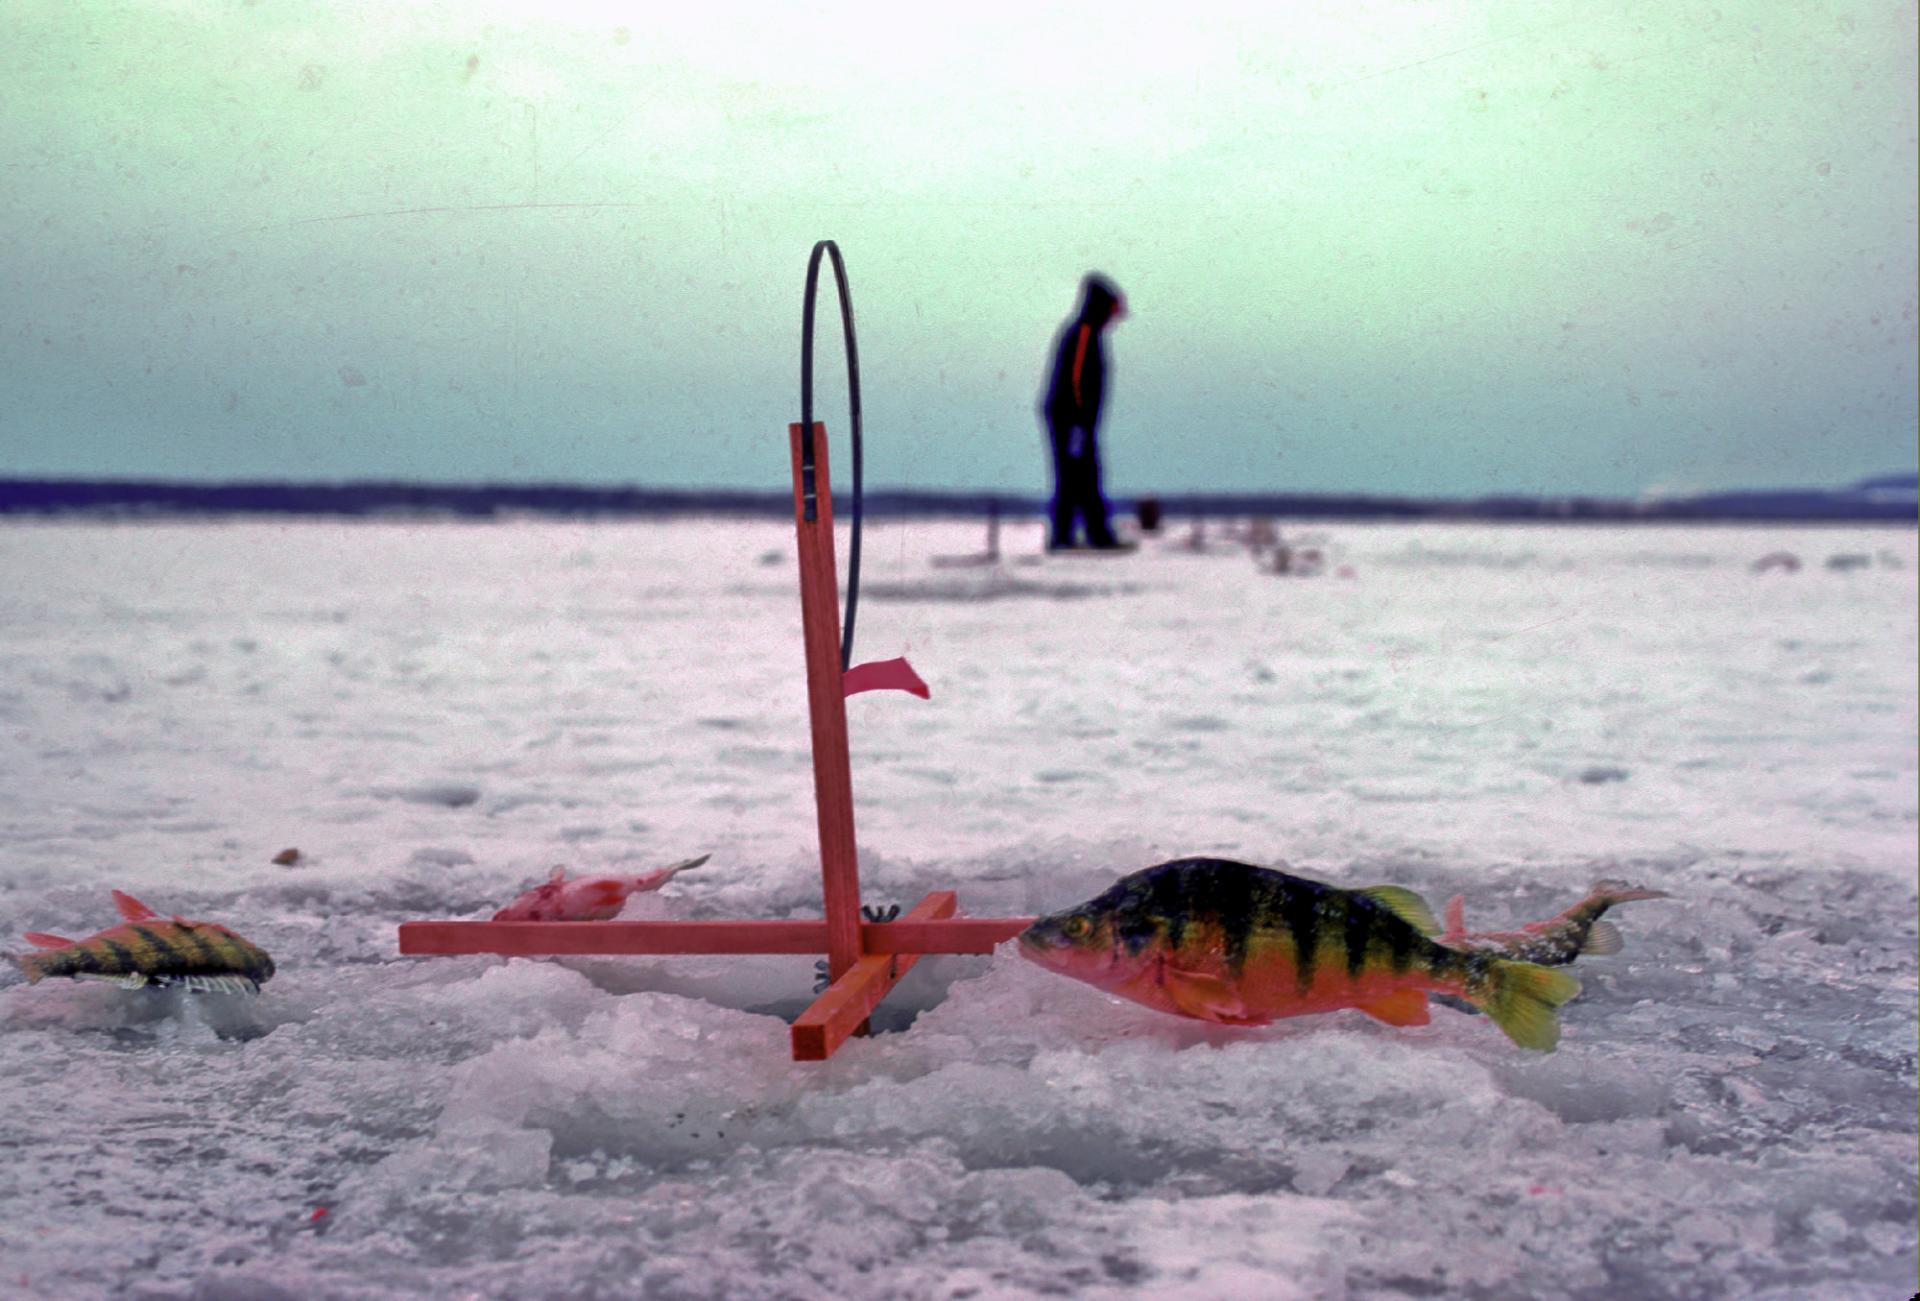 Putnam Pond and North Pond are popular spots for ice fishing.